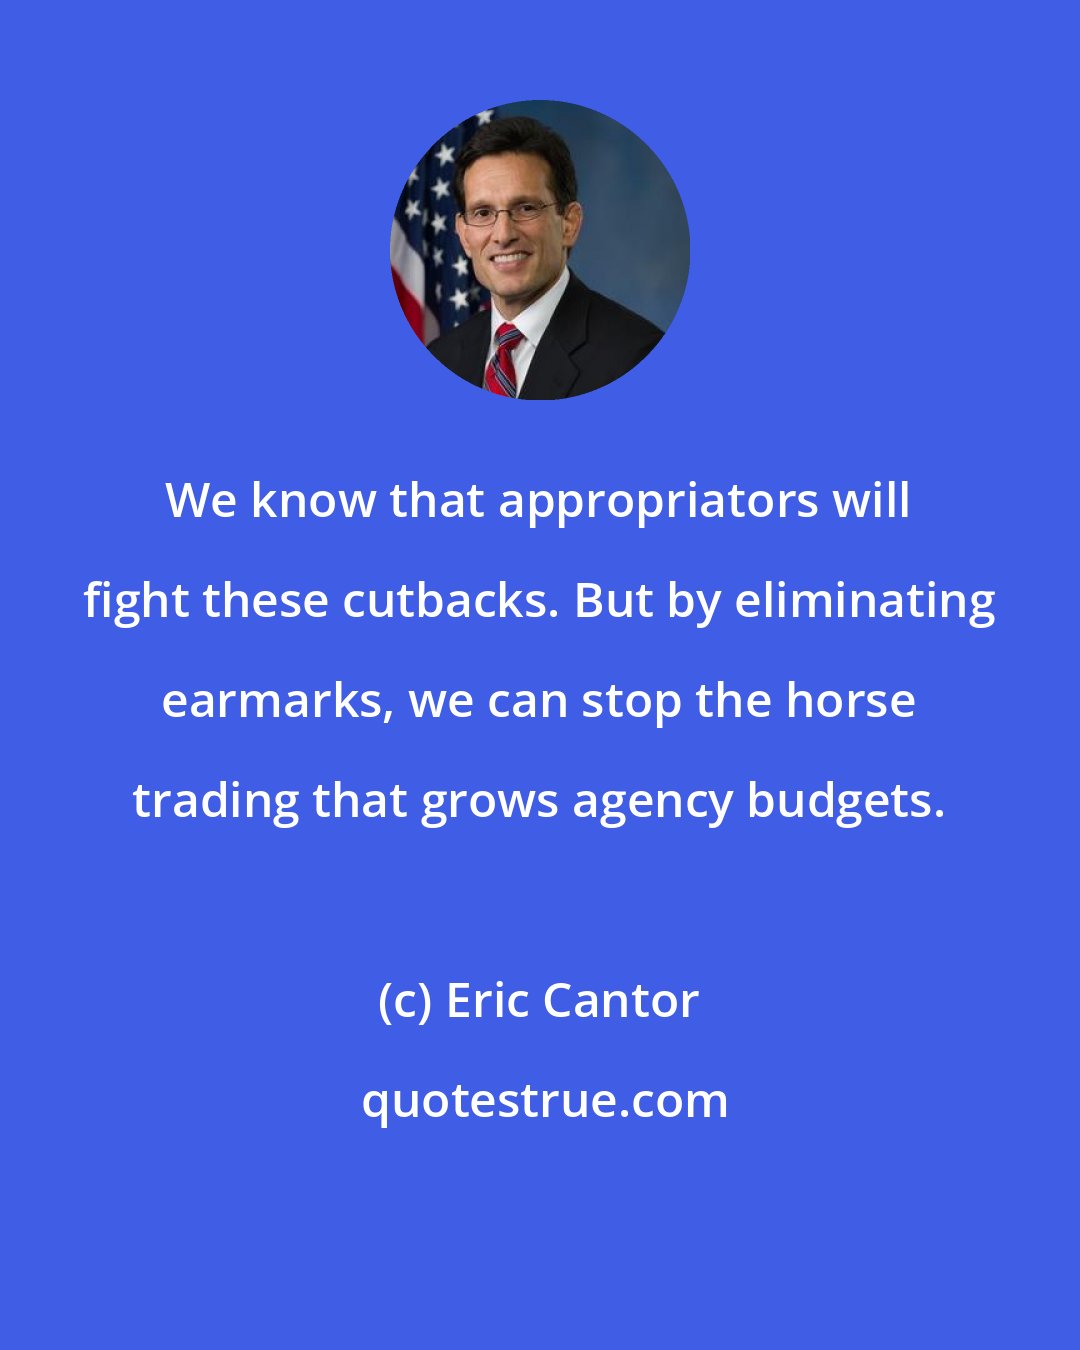 Eric Cantor: We know that appropriators will fight these cutbacks. But by eliminating earmarks, we can stop the horse trading that grows agency budgets.